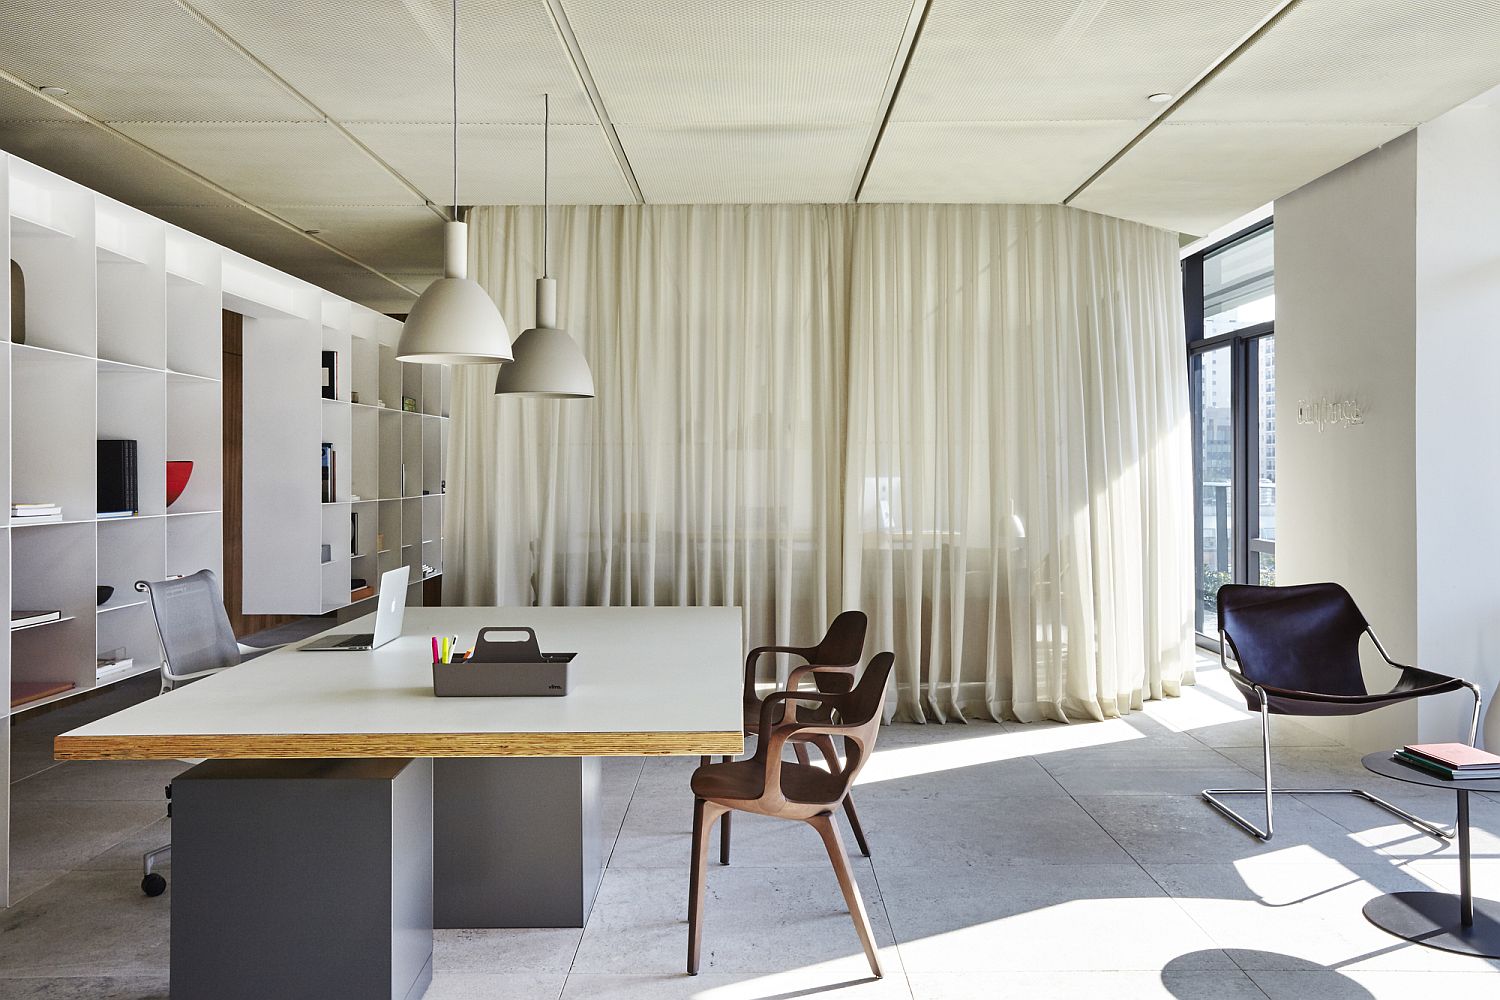 Curtains-delineate-the-private-meeting-rooms-and-work-areas-from-the-public-spaces